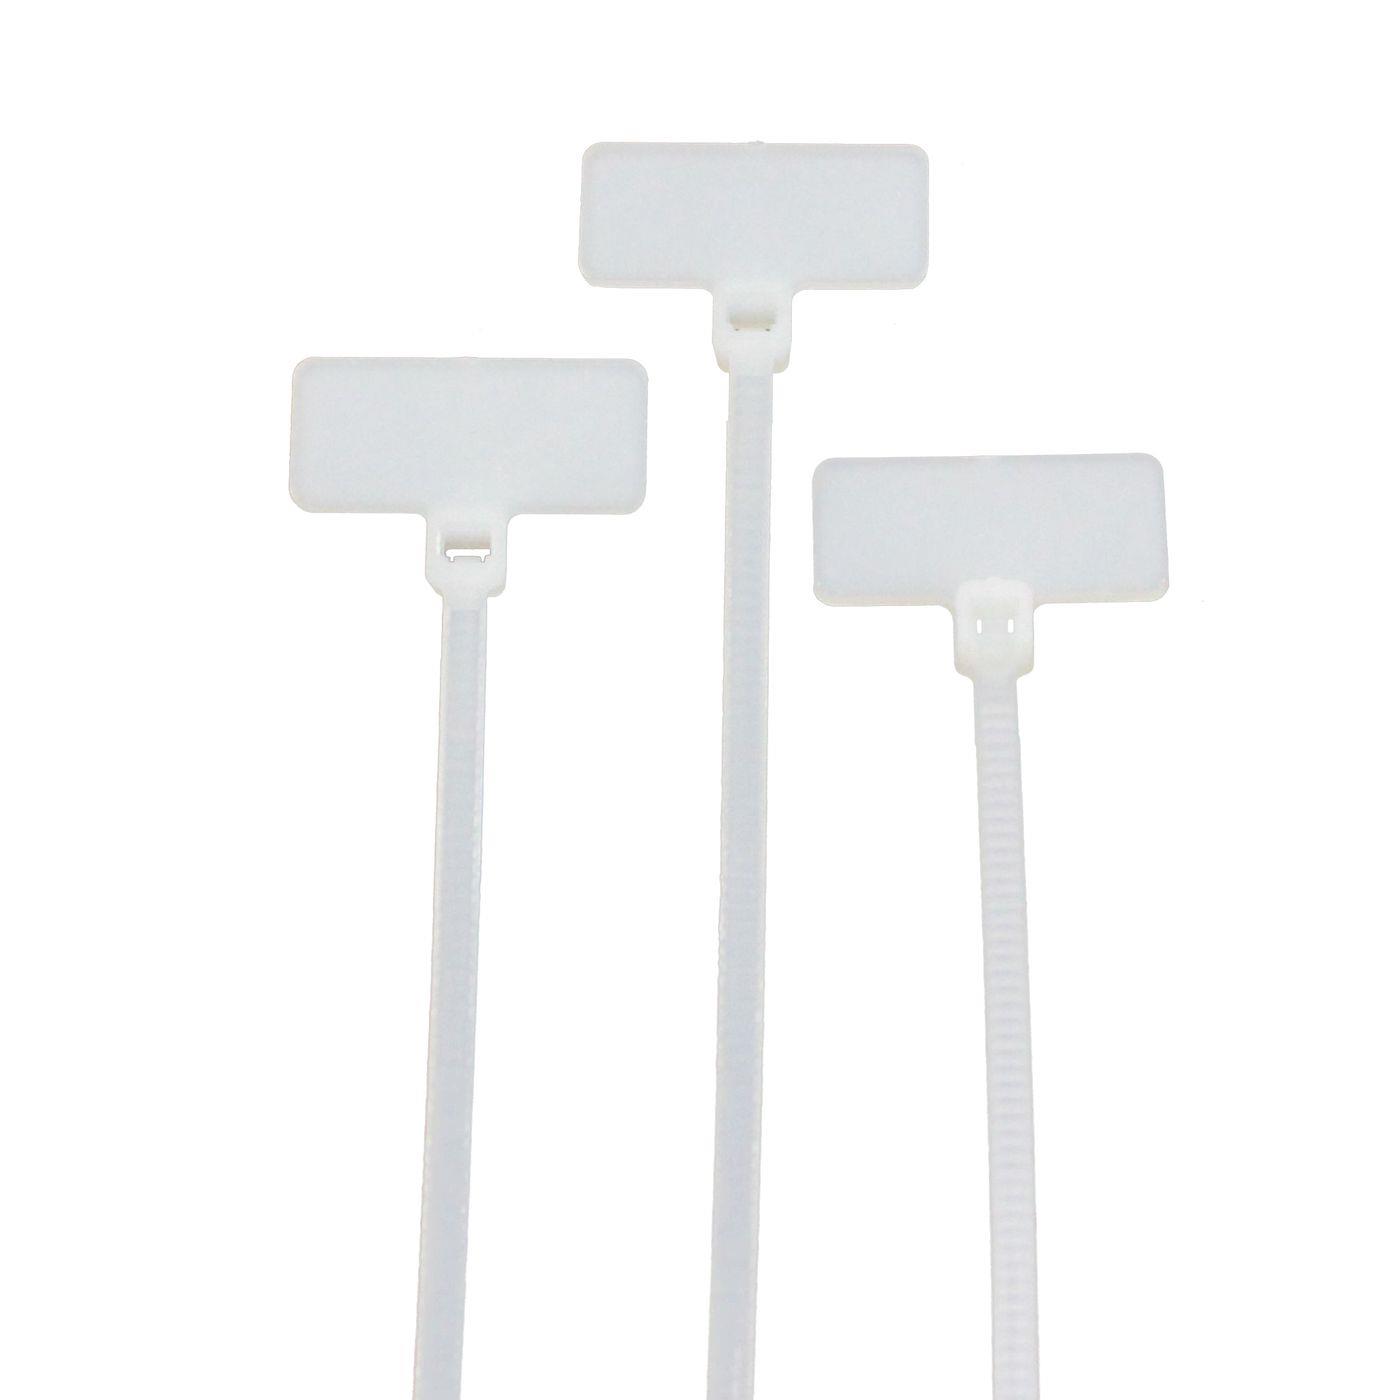 100x Cable tie with Text label 20x9mm 110 x 2,5mm White Natural 8kg PA6.6 Polyamide Industrial quality